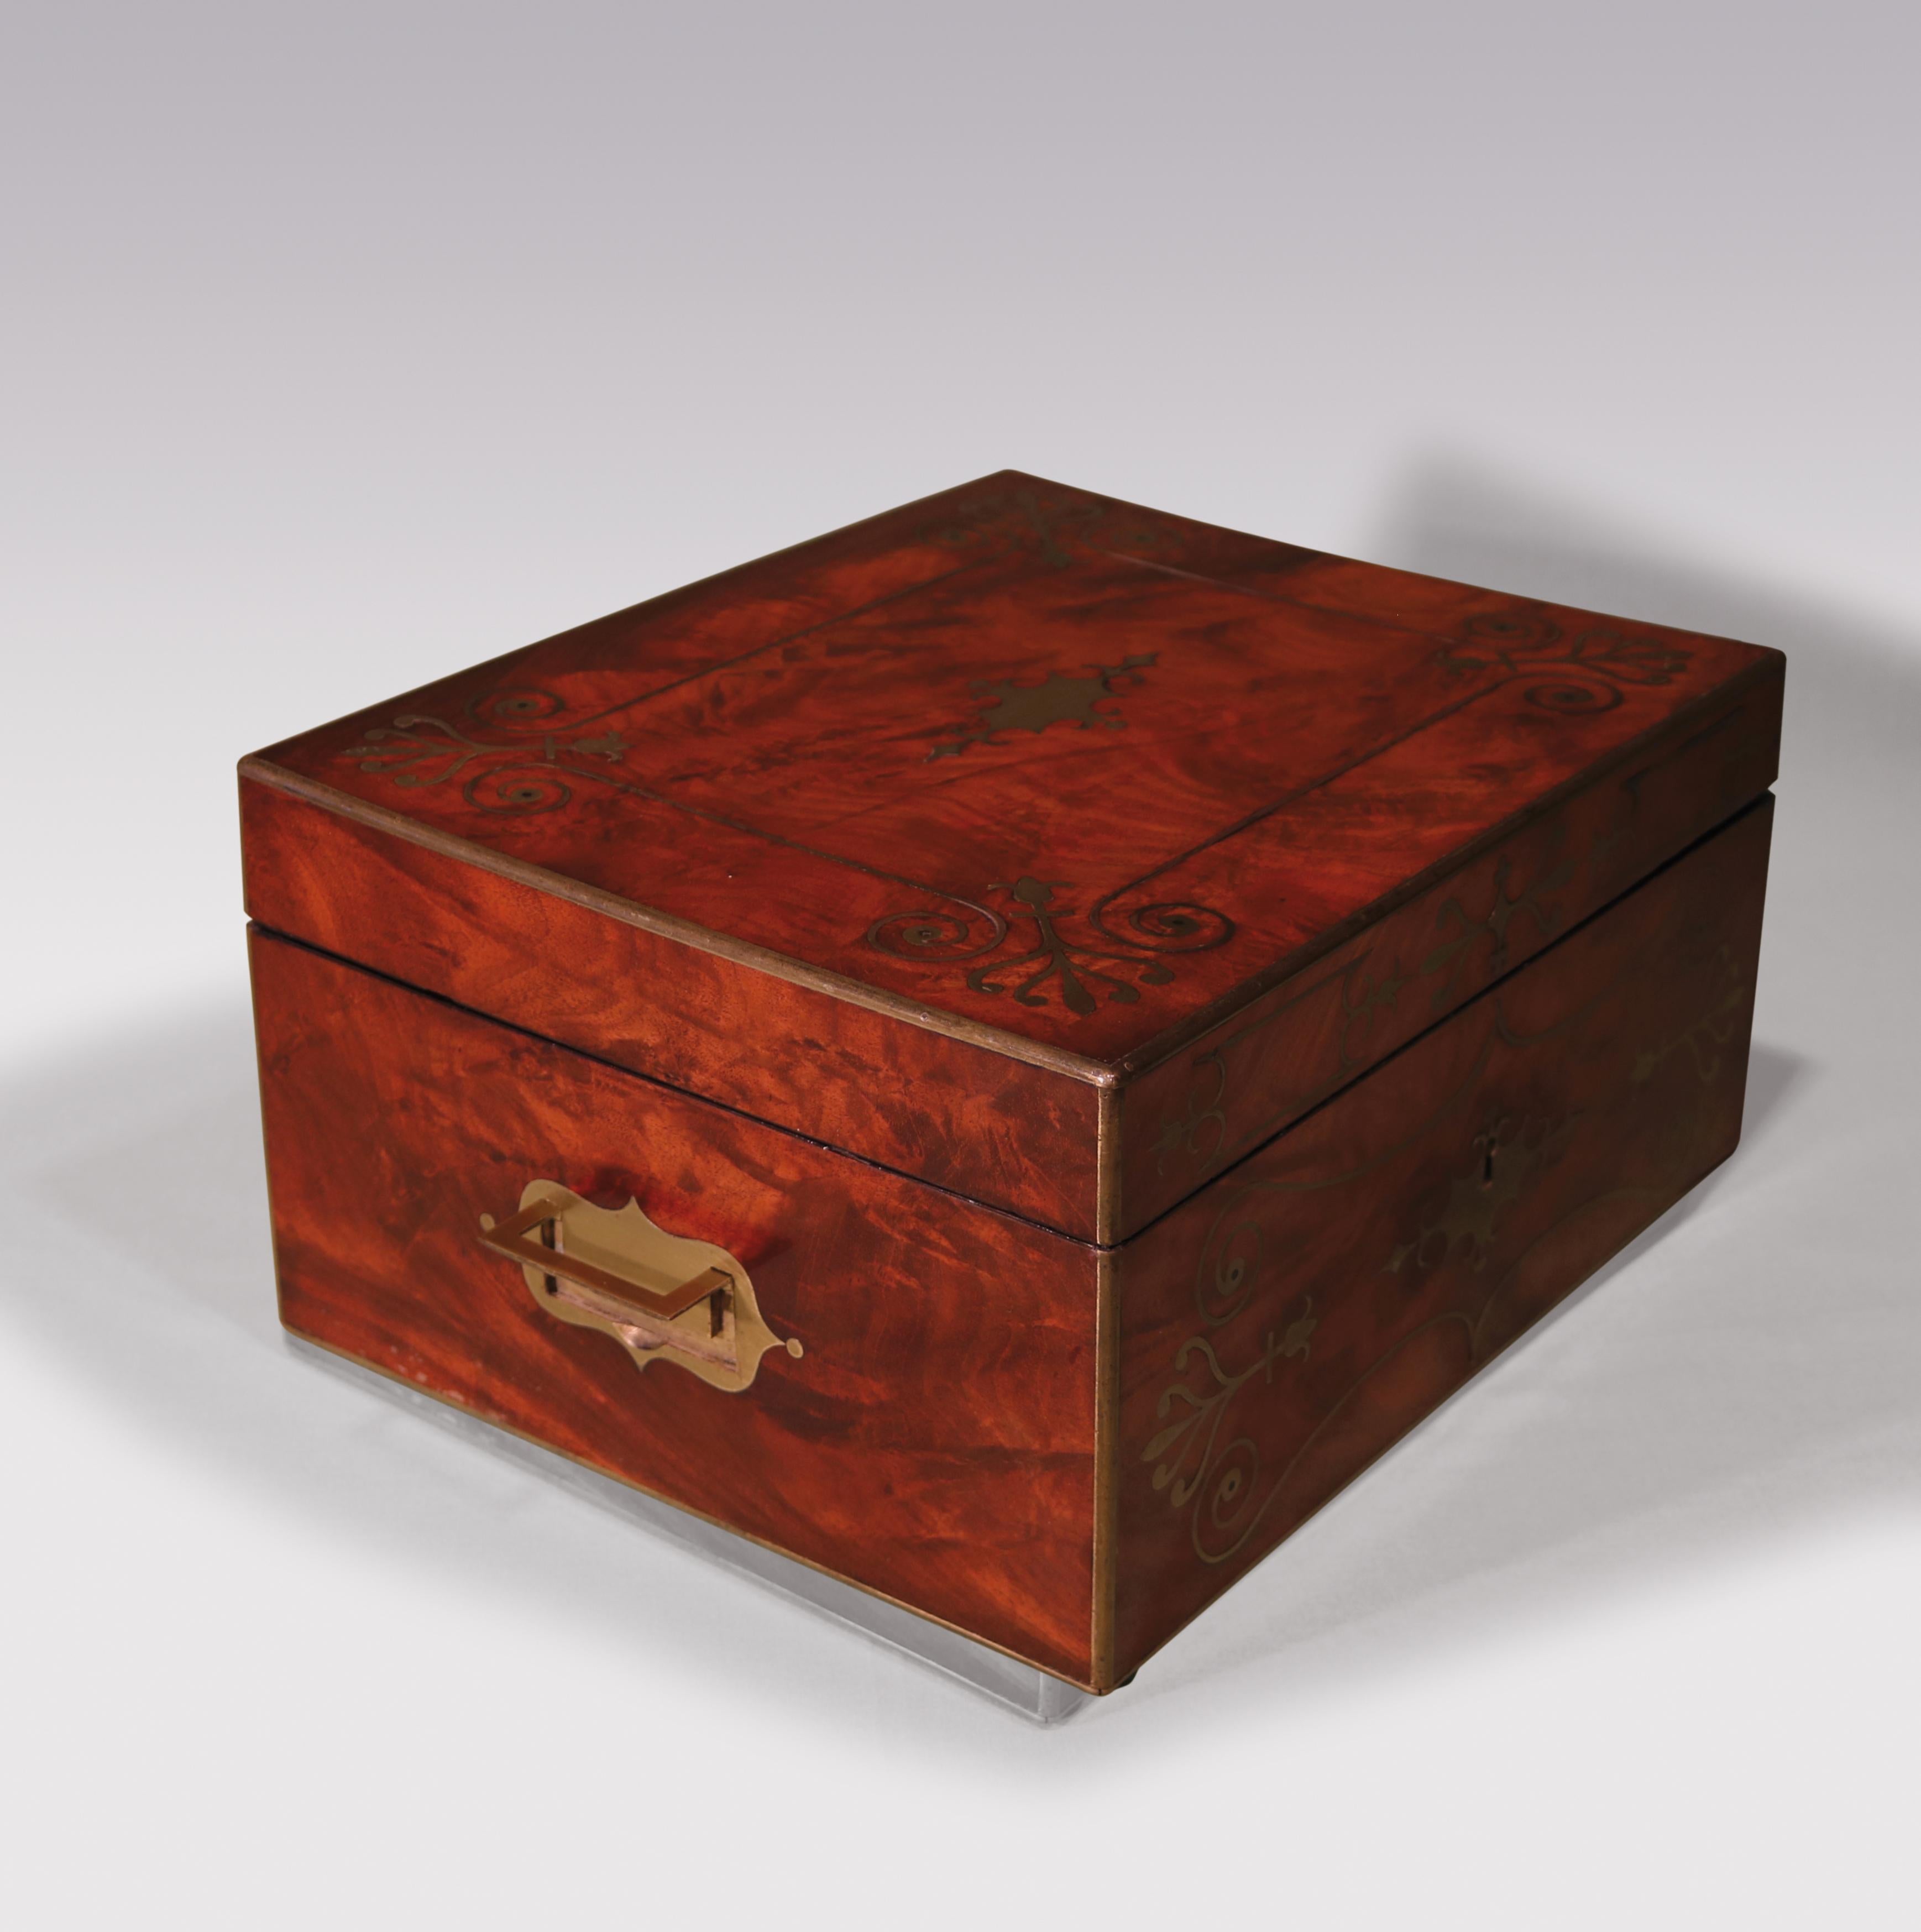 A fine quality early 19th century Regency period flame-figured mahogany stationary box with concealed carrying handles, intricately brass inlaid with scrolls, harebells & acanthus designs.